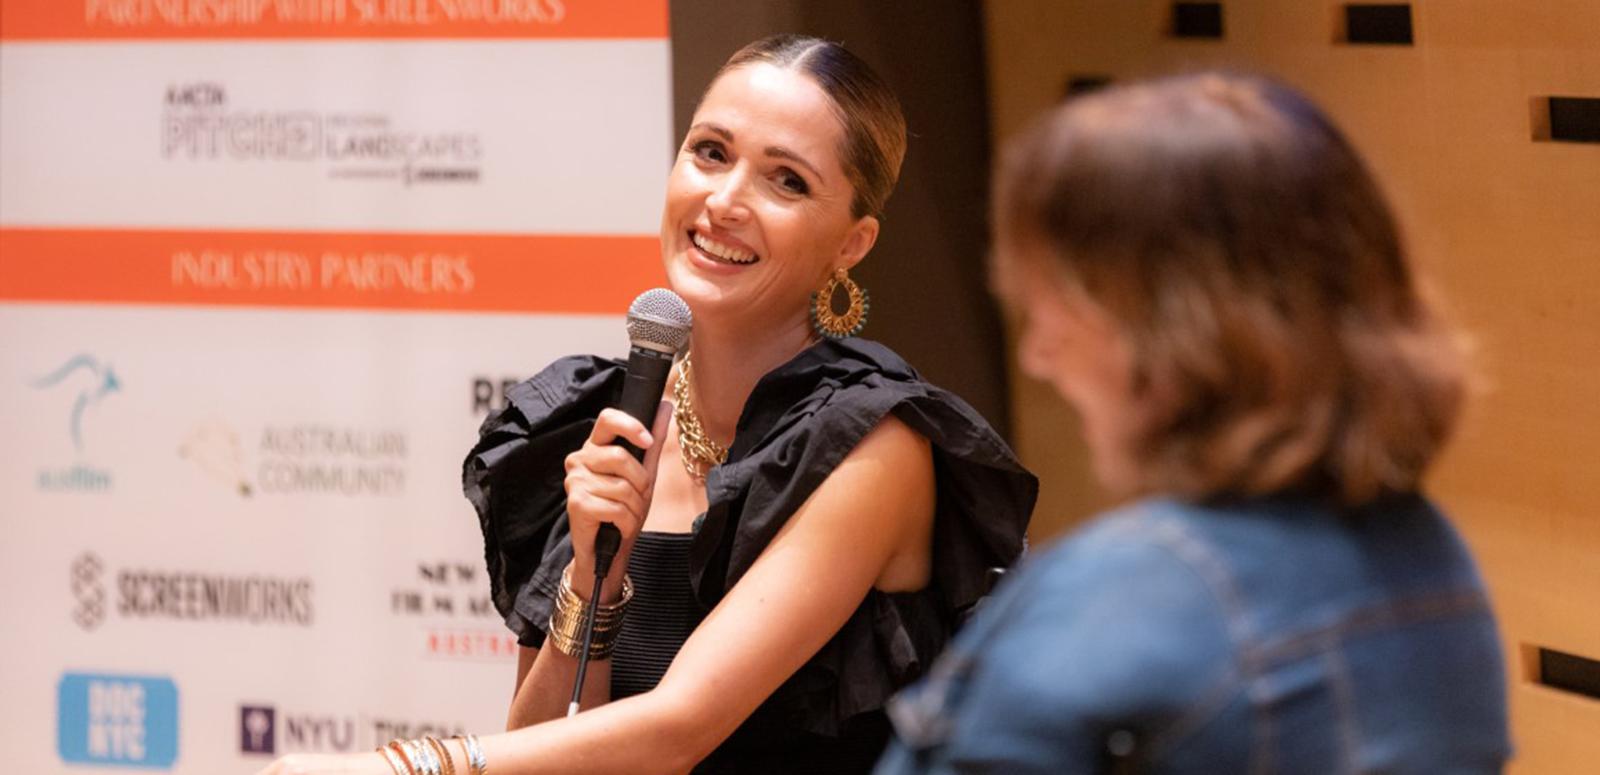 Rose Byrne holds a microphone at an onstage Q&A